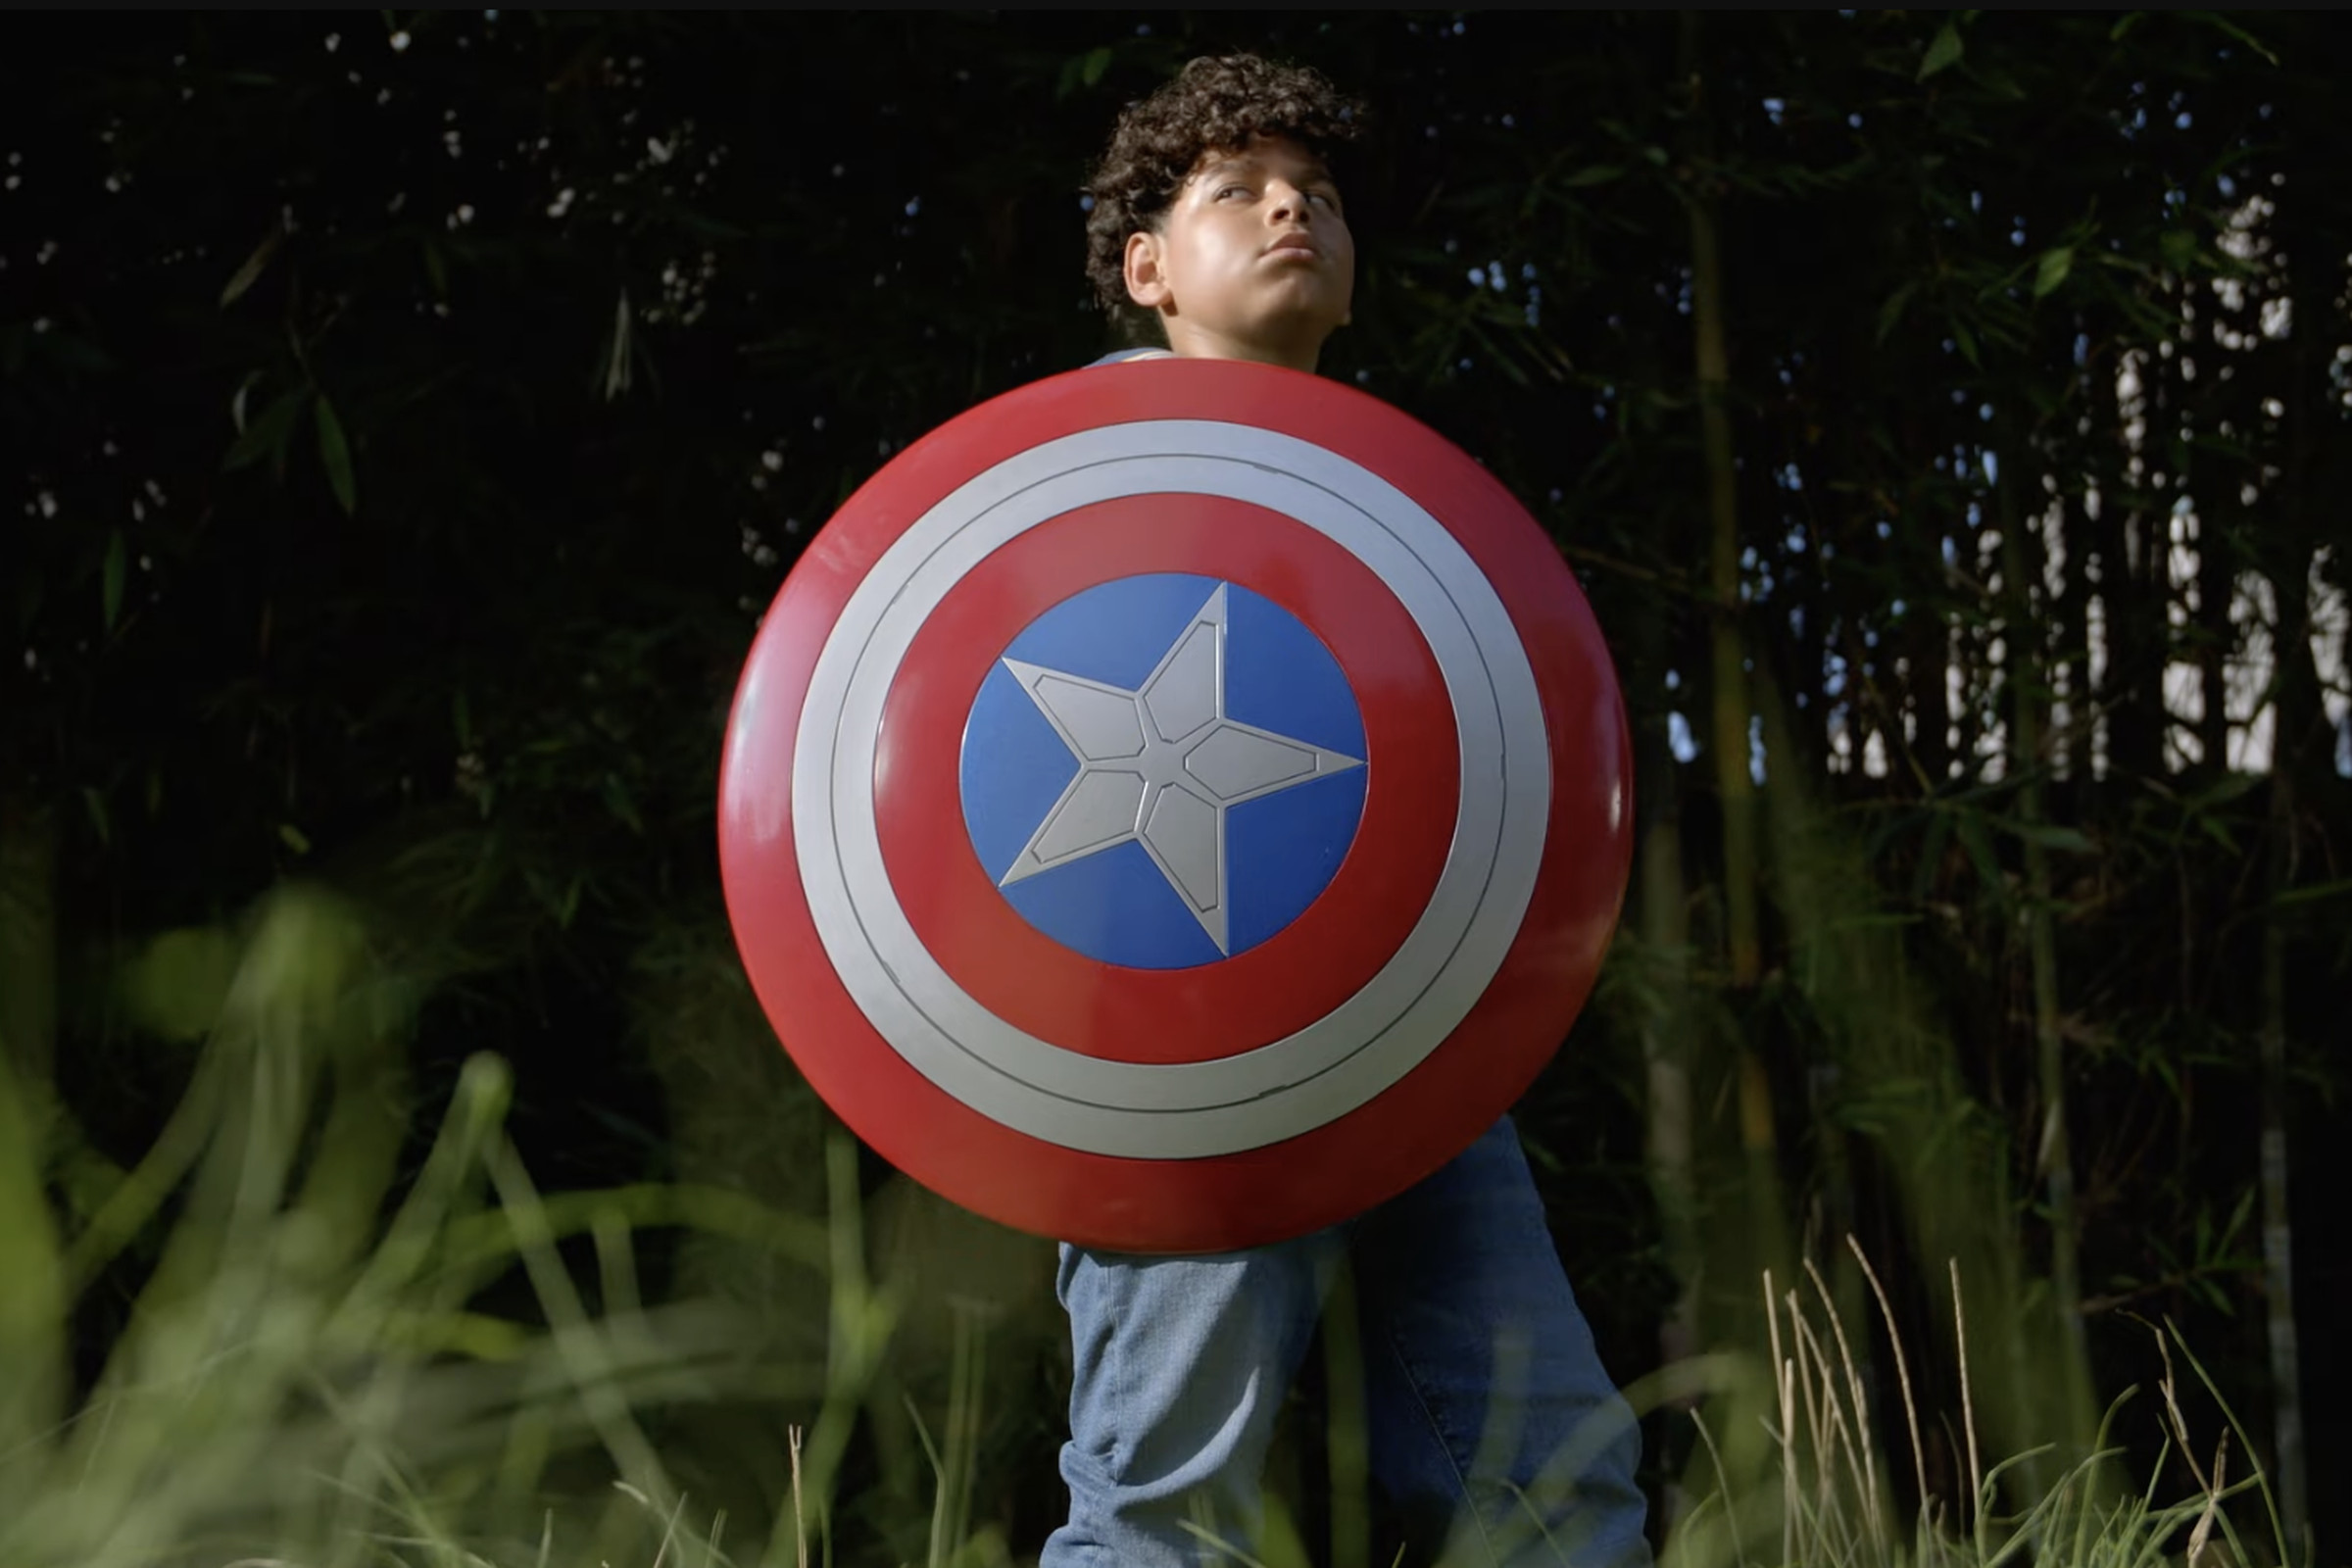 Image of young boy outside standing in grass looking heroically into the distance while holding Captain America’s sheild